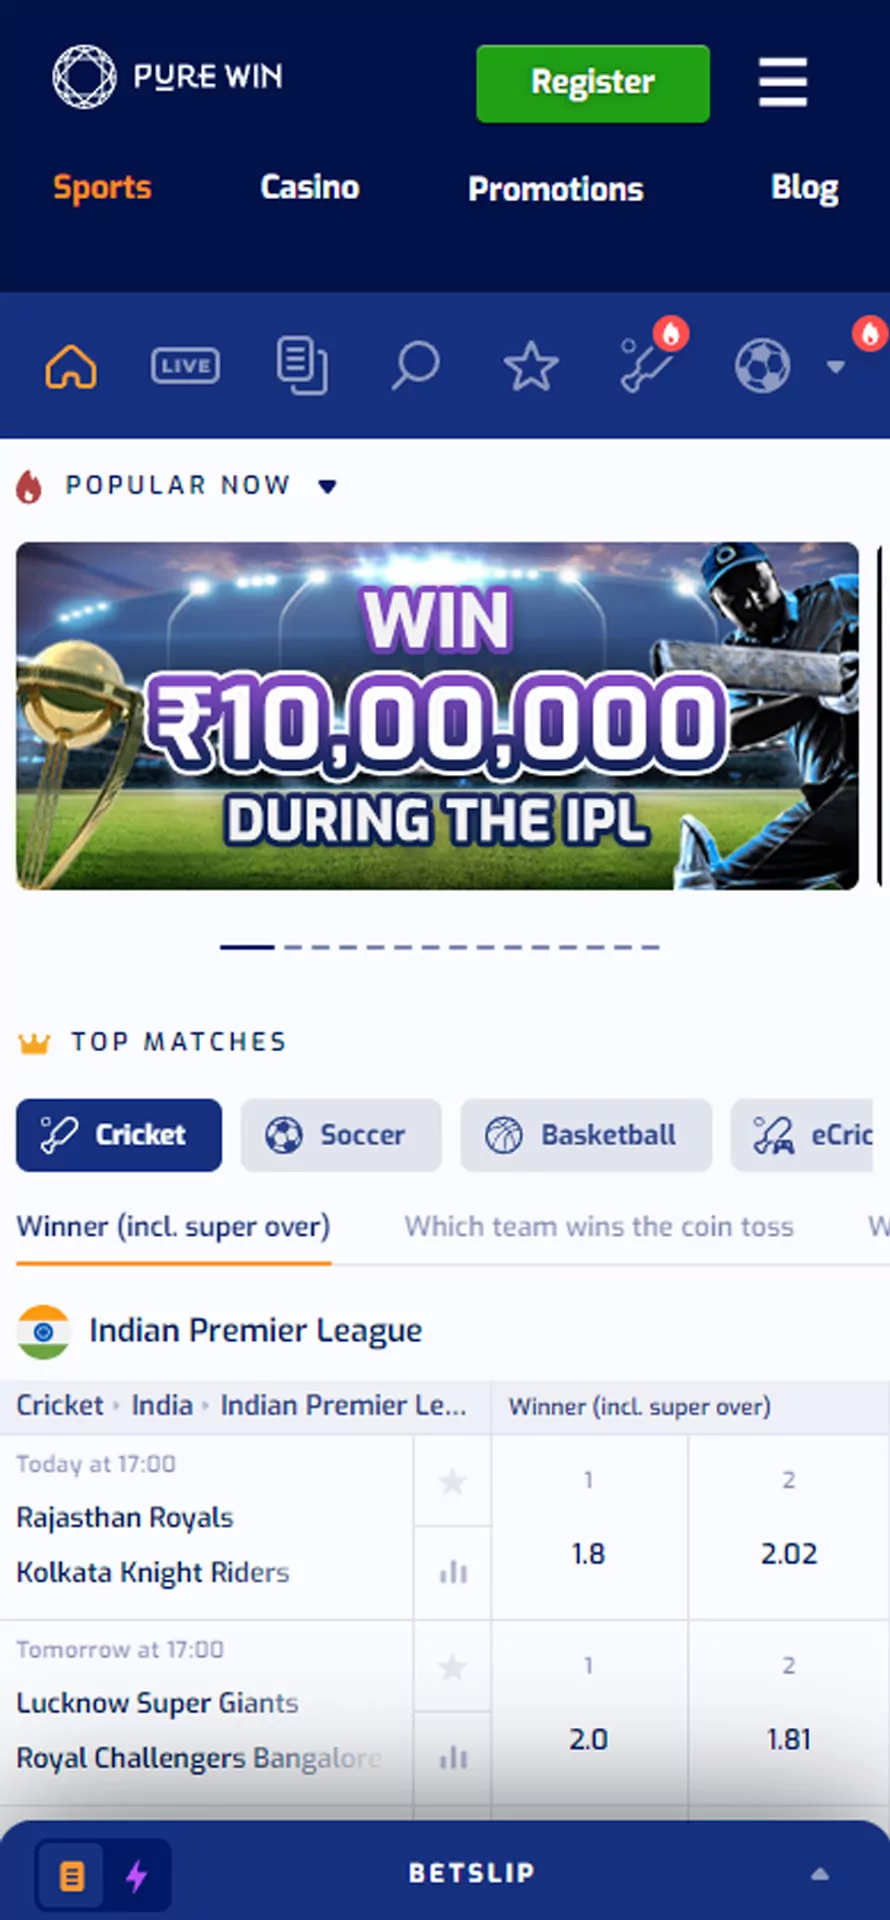 Bet on IPL matches at Pure Win App.